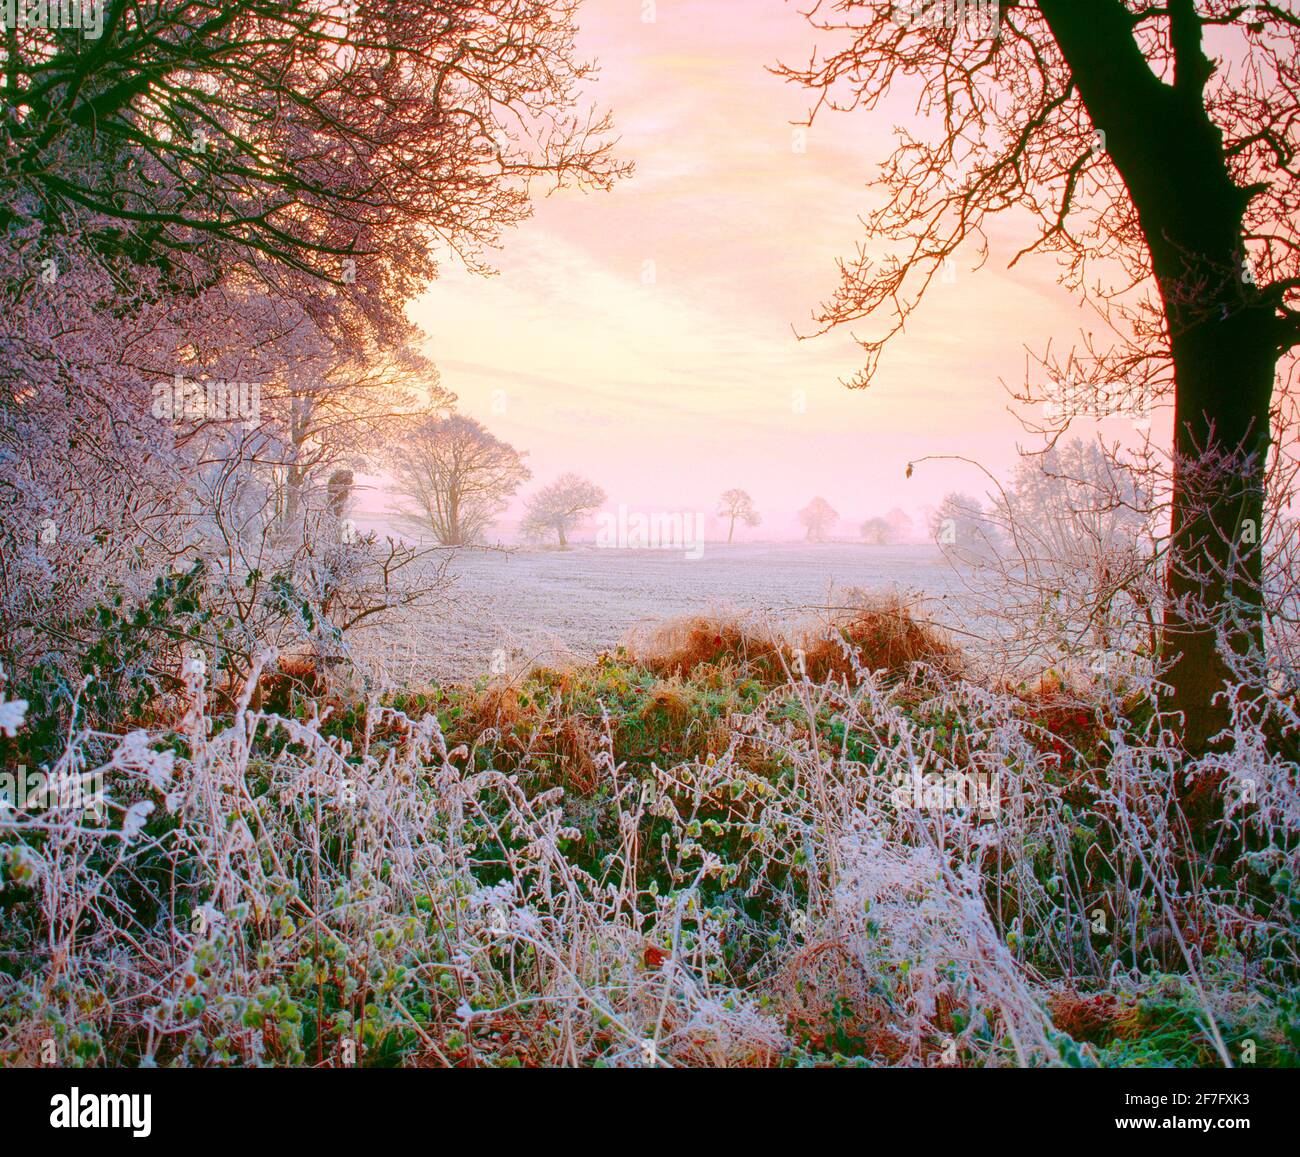 UK, Cheshire, frosted dawn country scene, Stock Photo